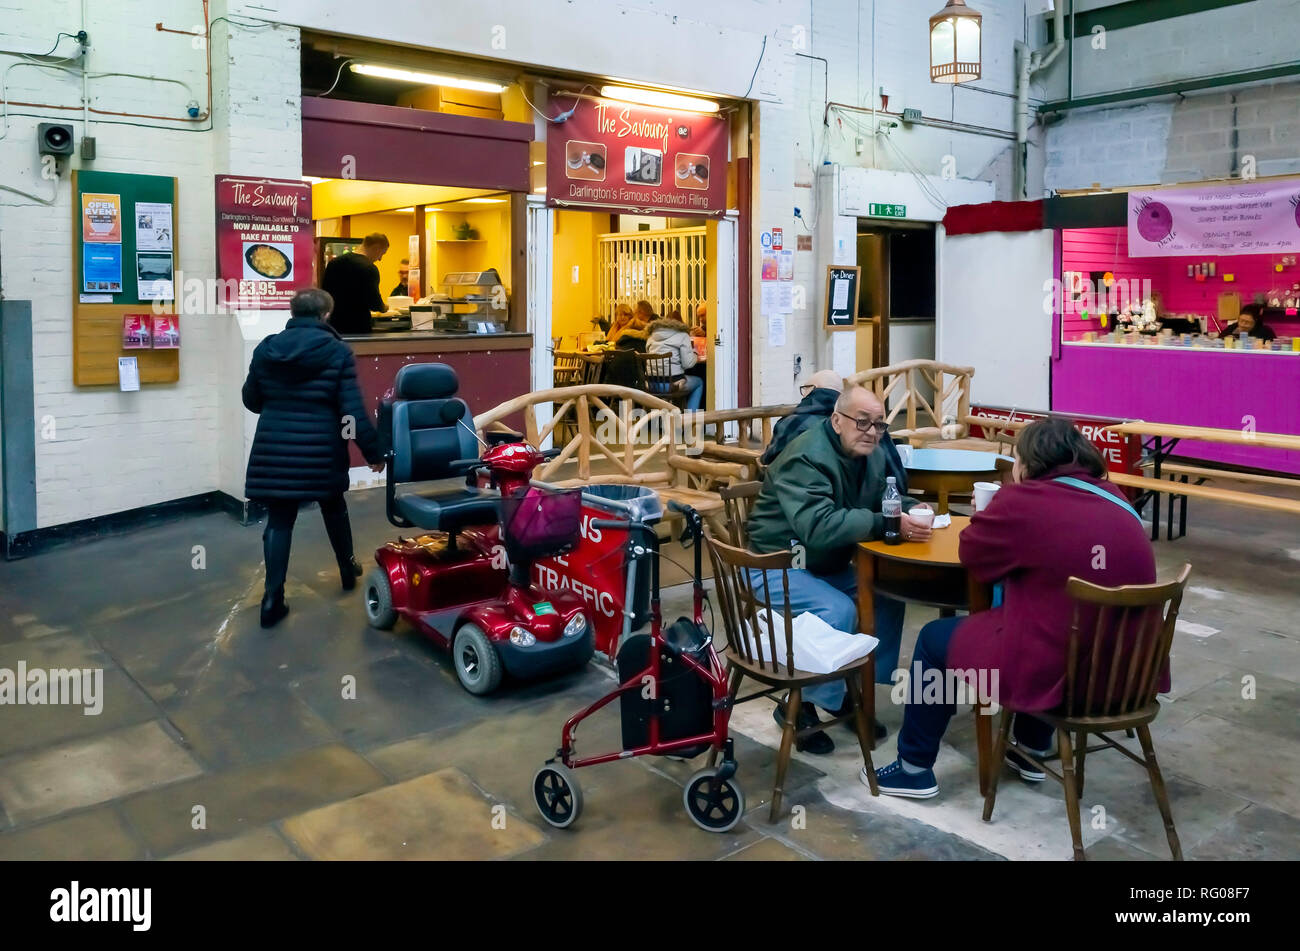 Disabled customers with Mobility Aids enjoying refreshment at the cafe in the Darlington Victorian Covered Market Stock Photo